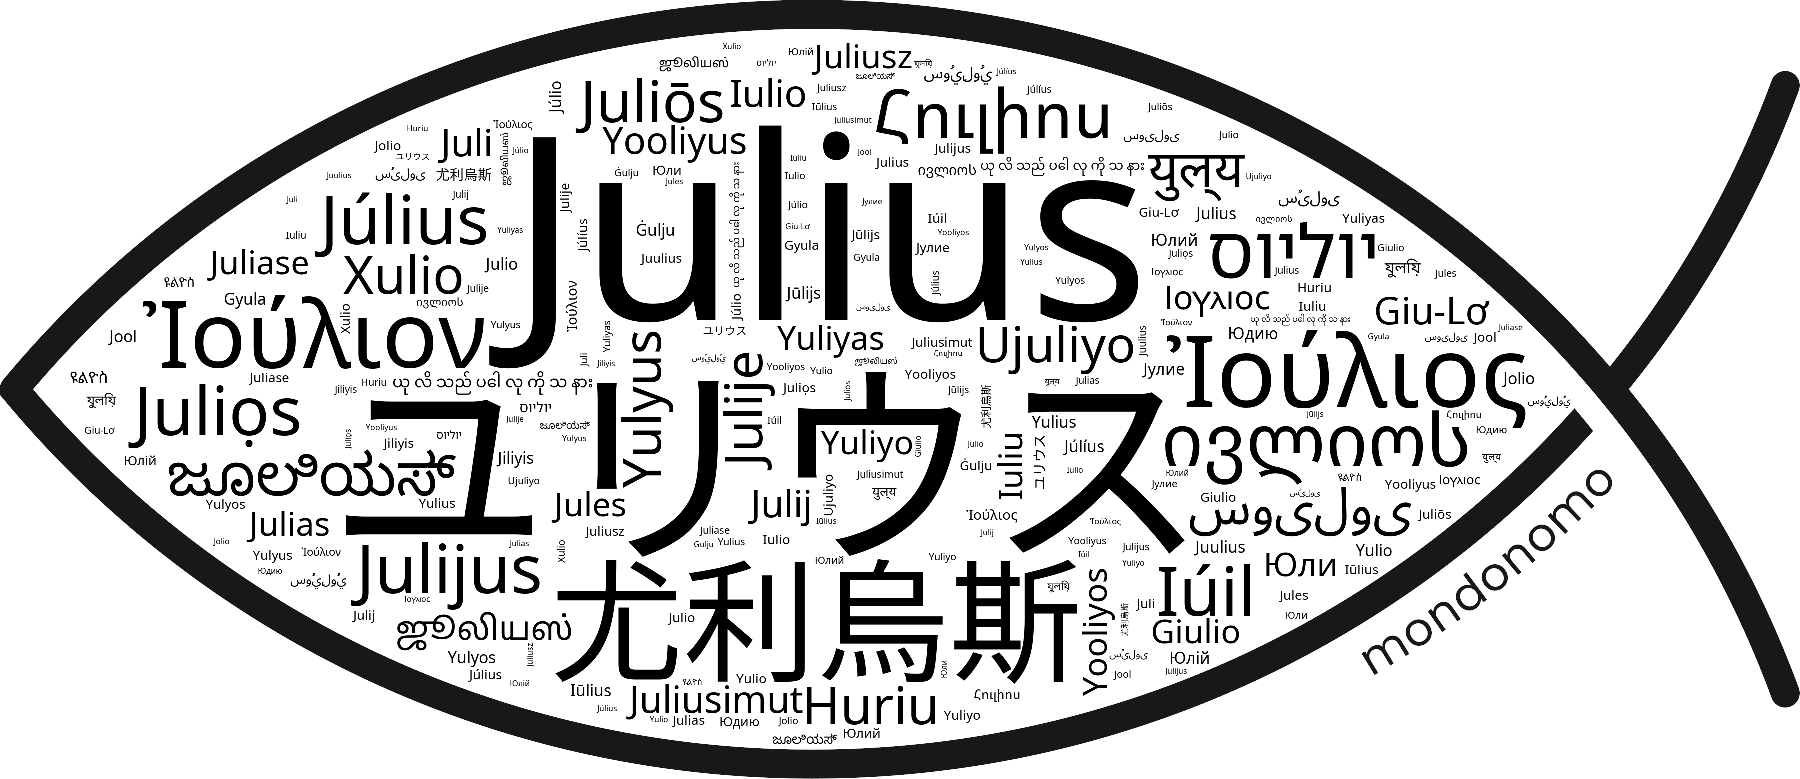 Name Julius in the world's Bibles